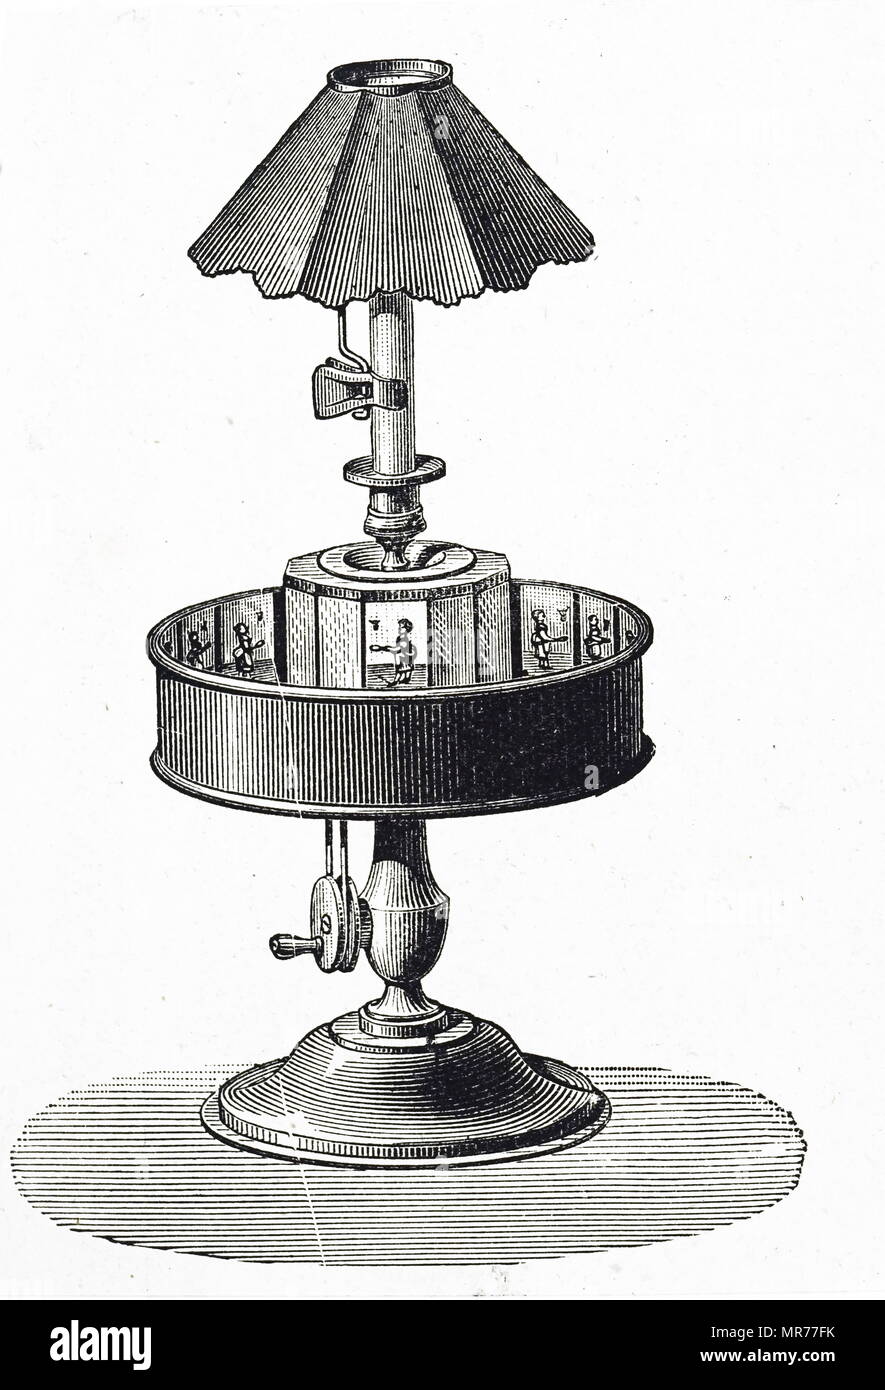 Engraving depicting Charles-Émile Reynaud's praxinoscope. A painted strip with figures was placed inside the circumference of the drum which was rotated. The image reflected in the mirrors in the centre of the apparatus gave the impression of a continuous moving picture. Charles-Émile Reynaud (1844-1918) a French inventor. Dated 19th century Stock Photo